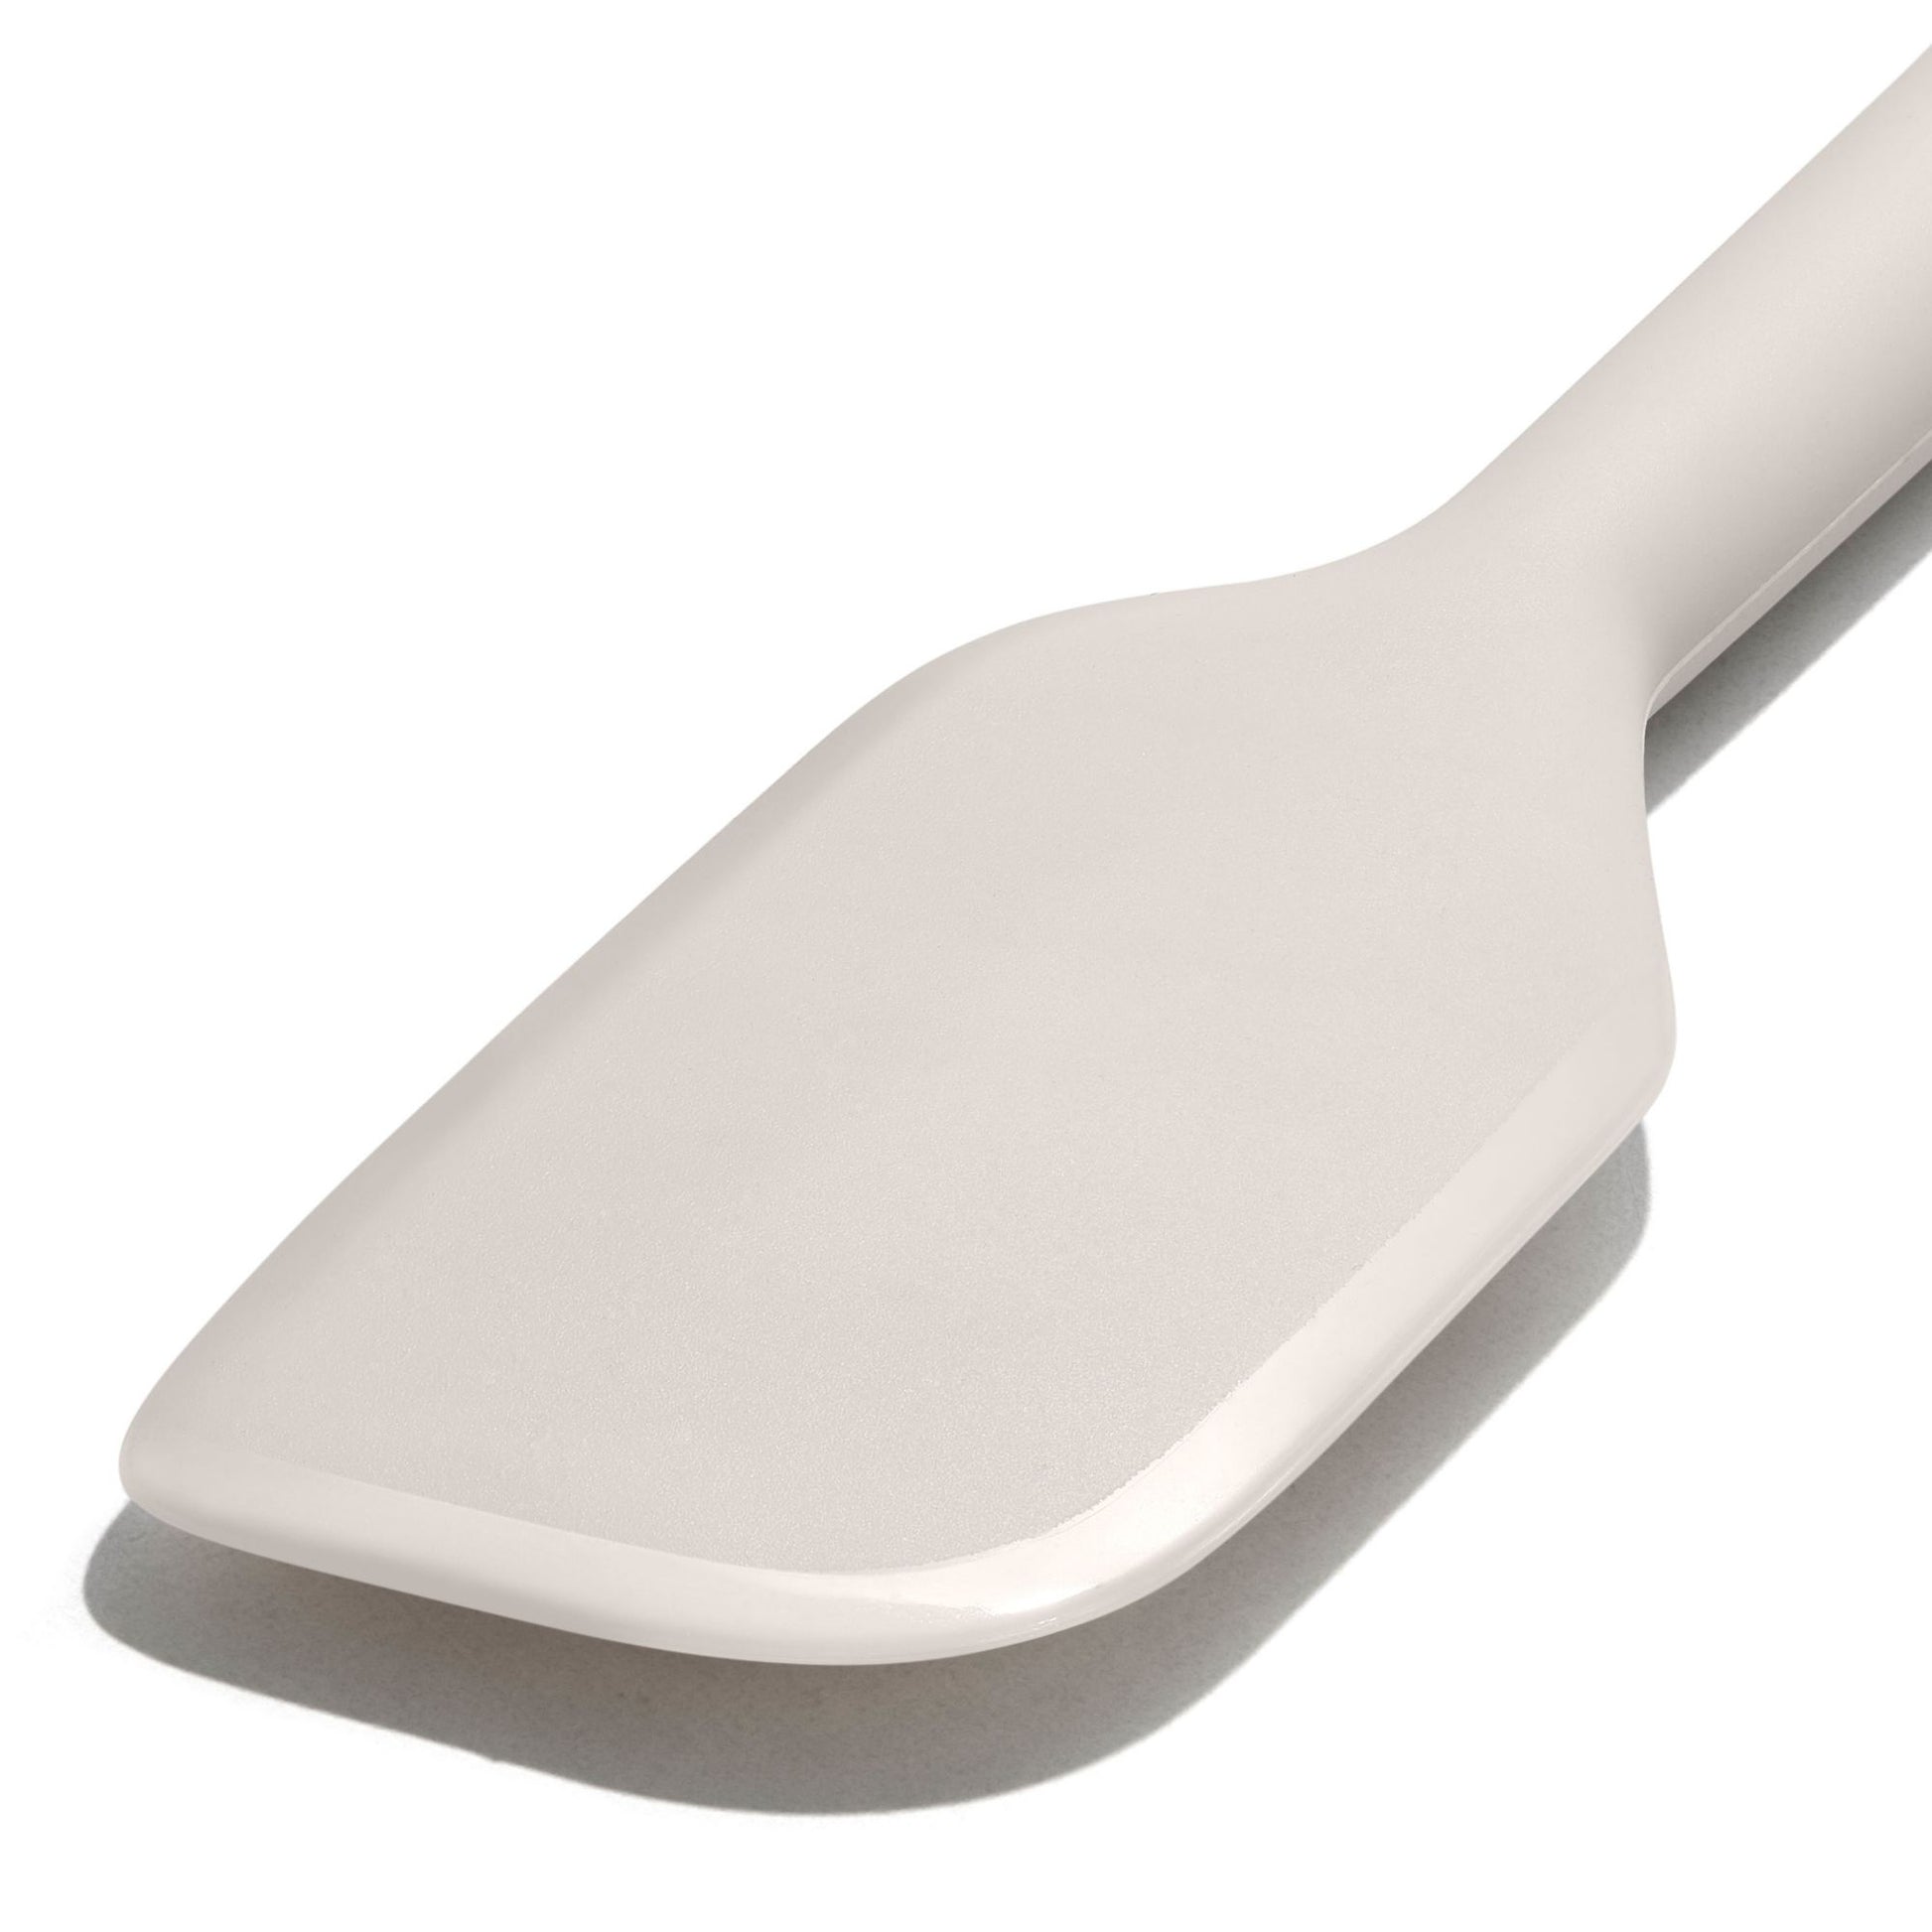 close up view of the spatula end displayed on a white background